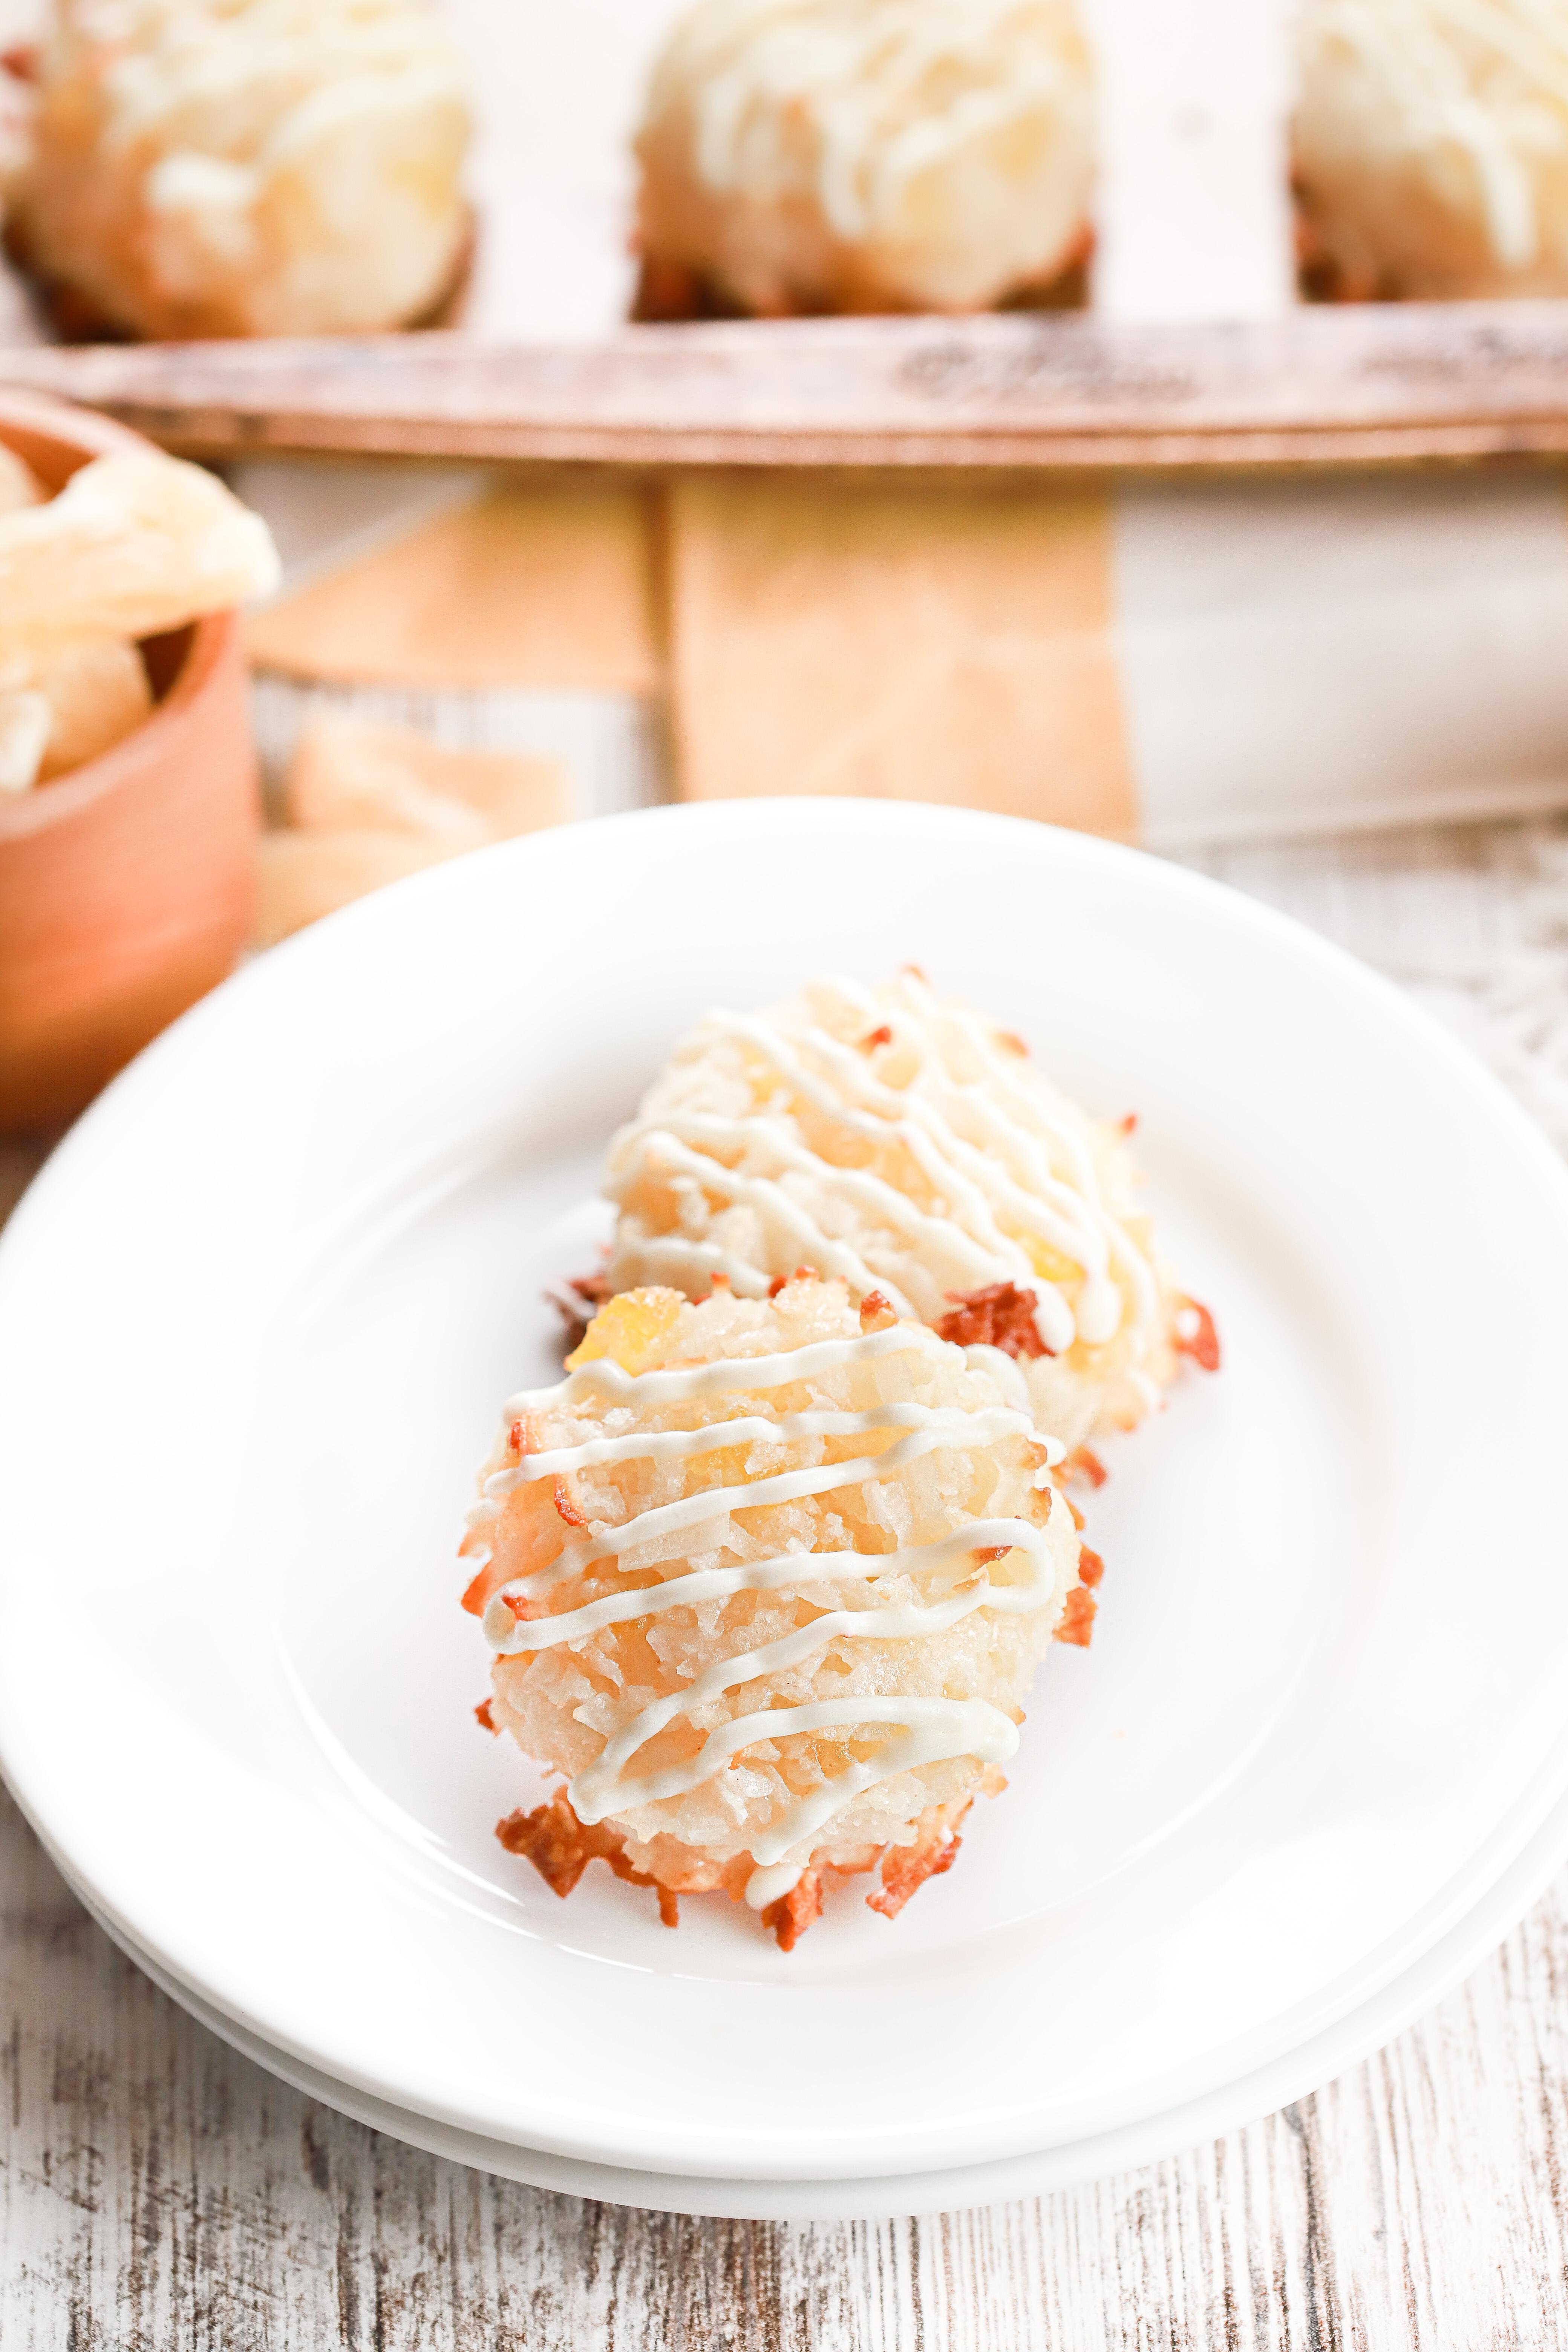 Two pineapple coconut macaroons on a small white plate with a baking sheet full of macaroons in the background.